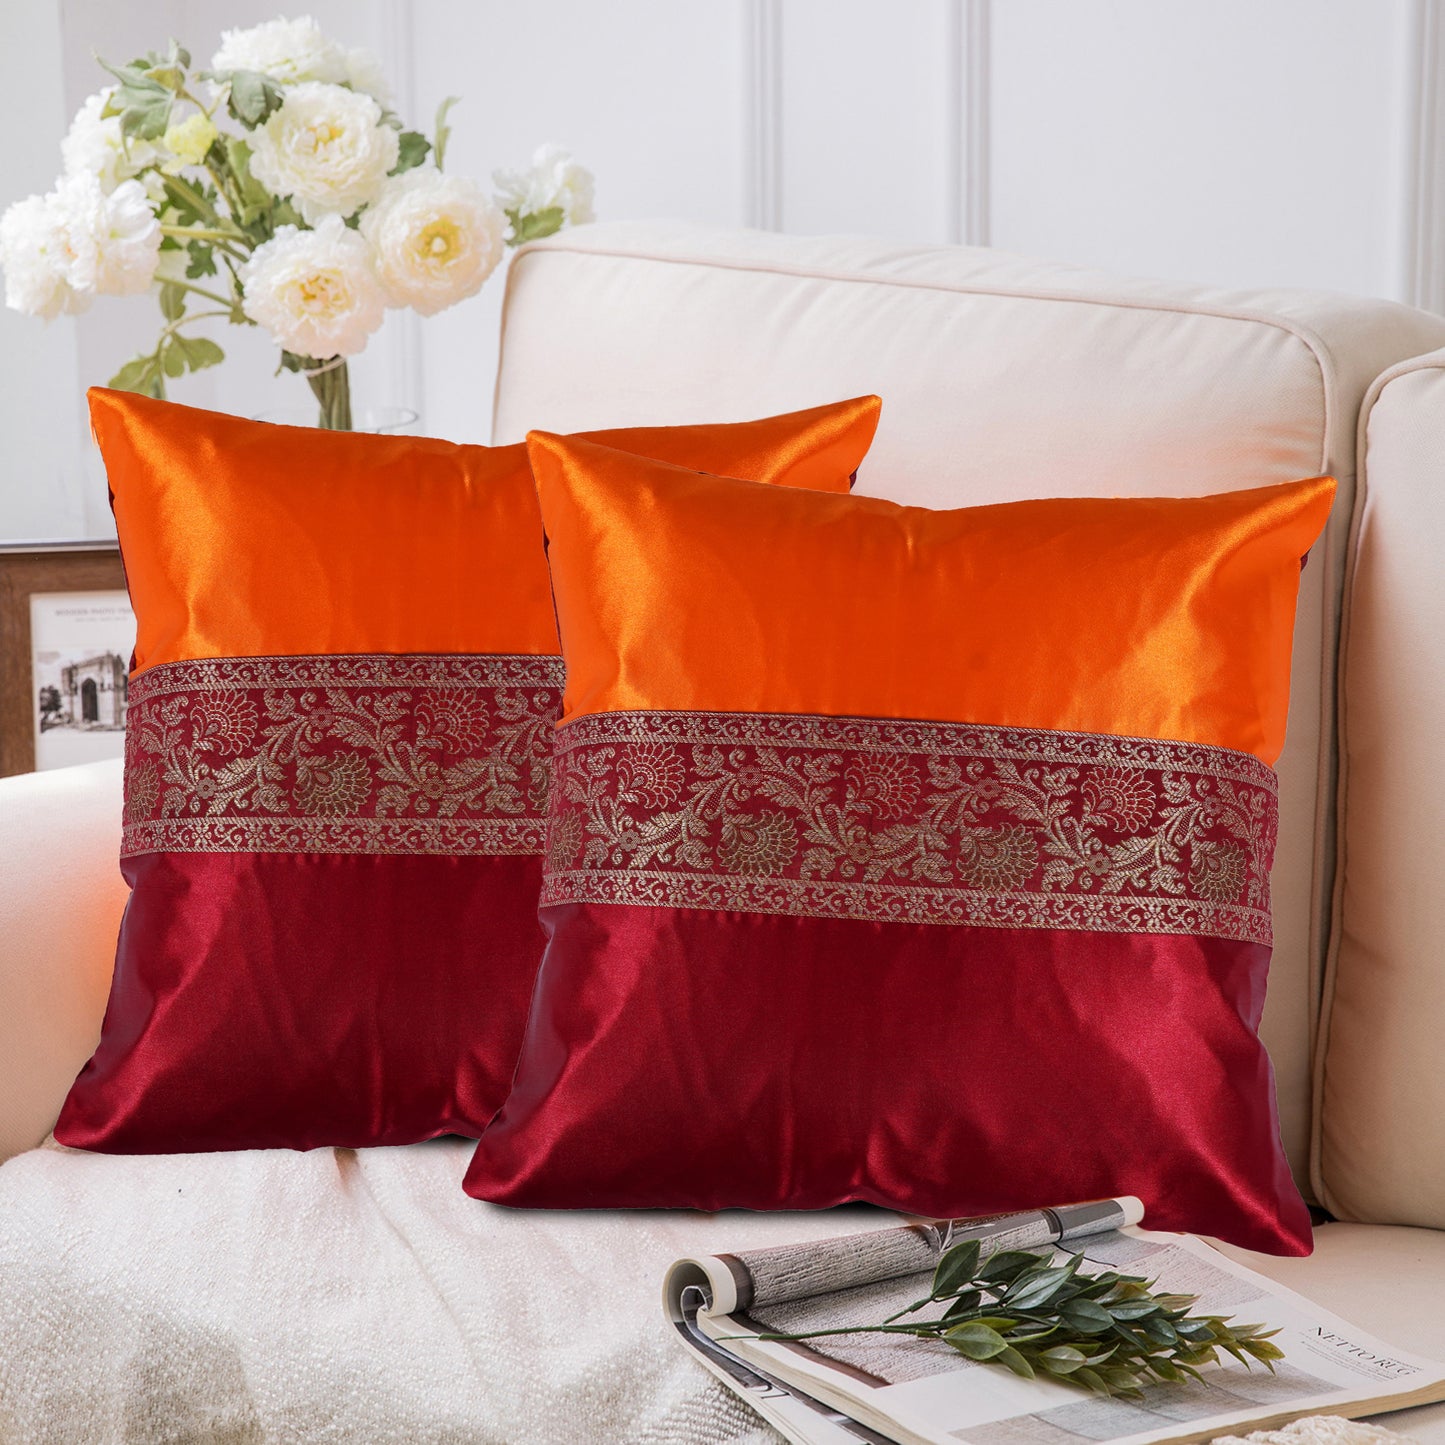 Set Of 2 Pc Indian Decorative Brocade Orange & Maroon Silky Satin Cushion Cover Square Throw Pillowcase for Couch Sofa Home Decor Ethnic Pillow Cover